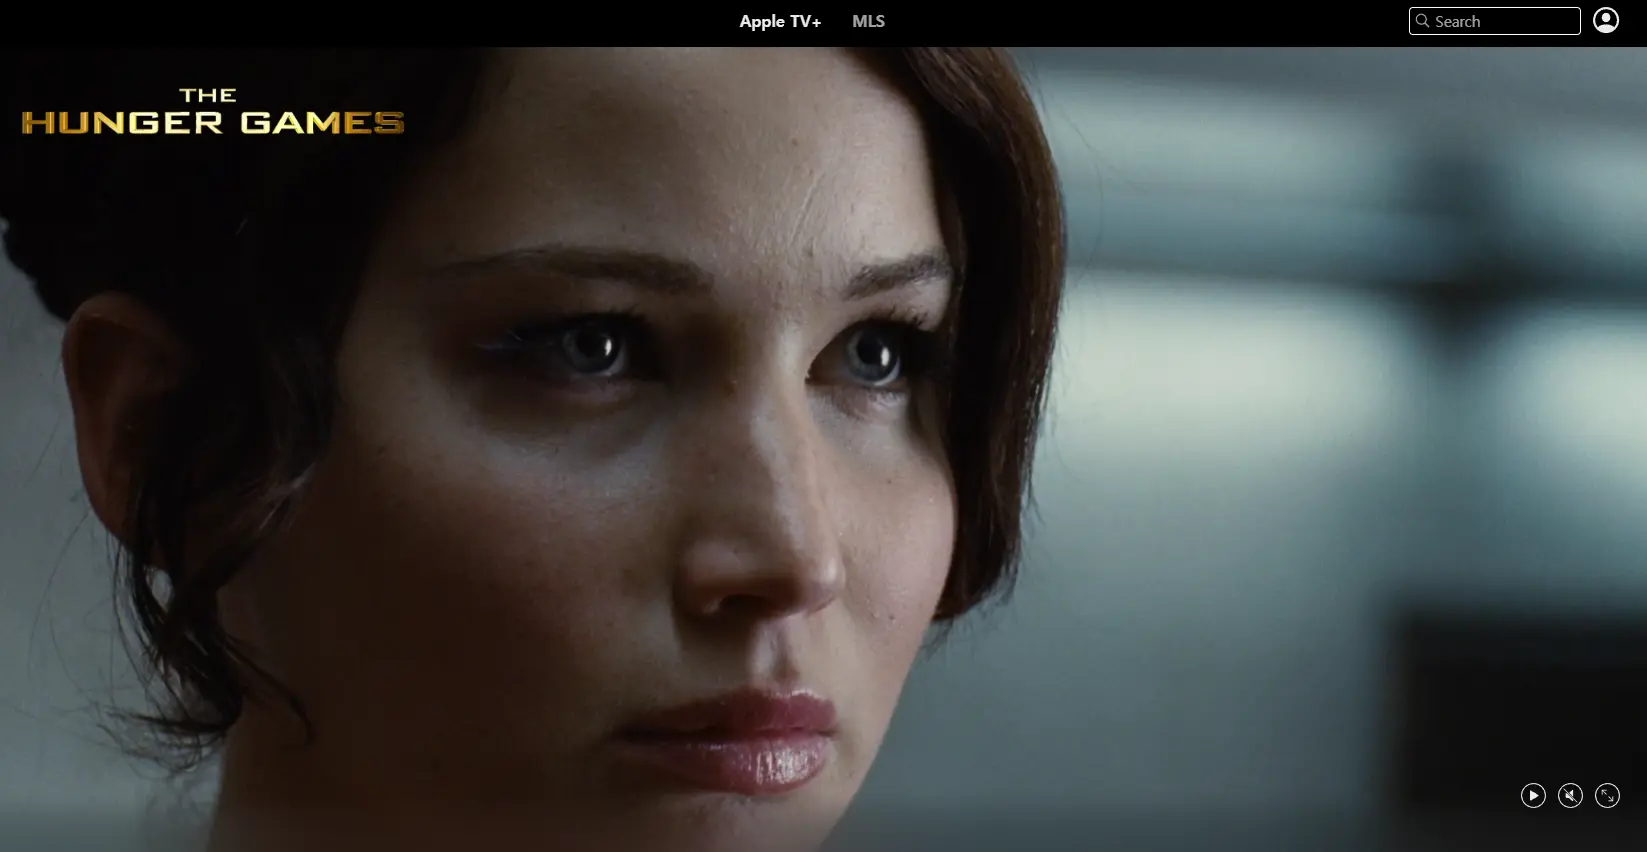 watch hunger games on Apple TV